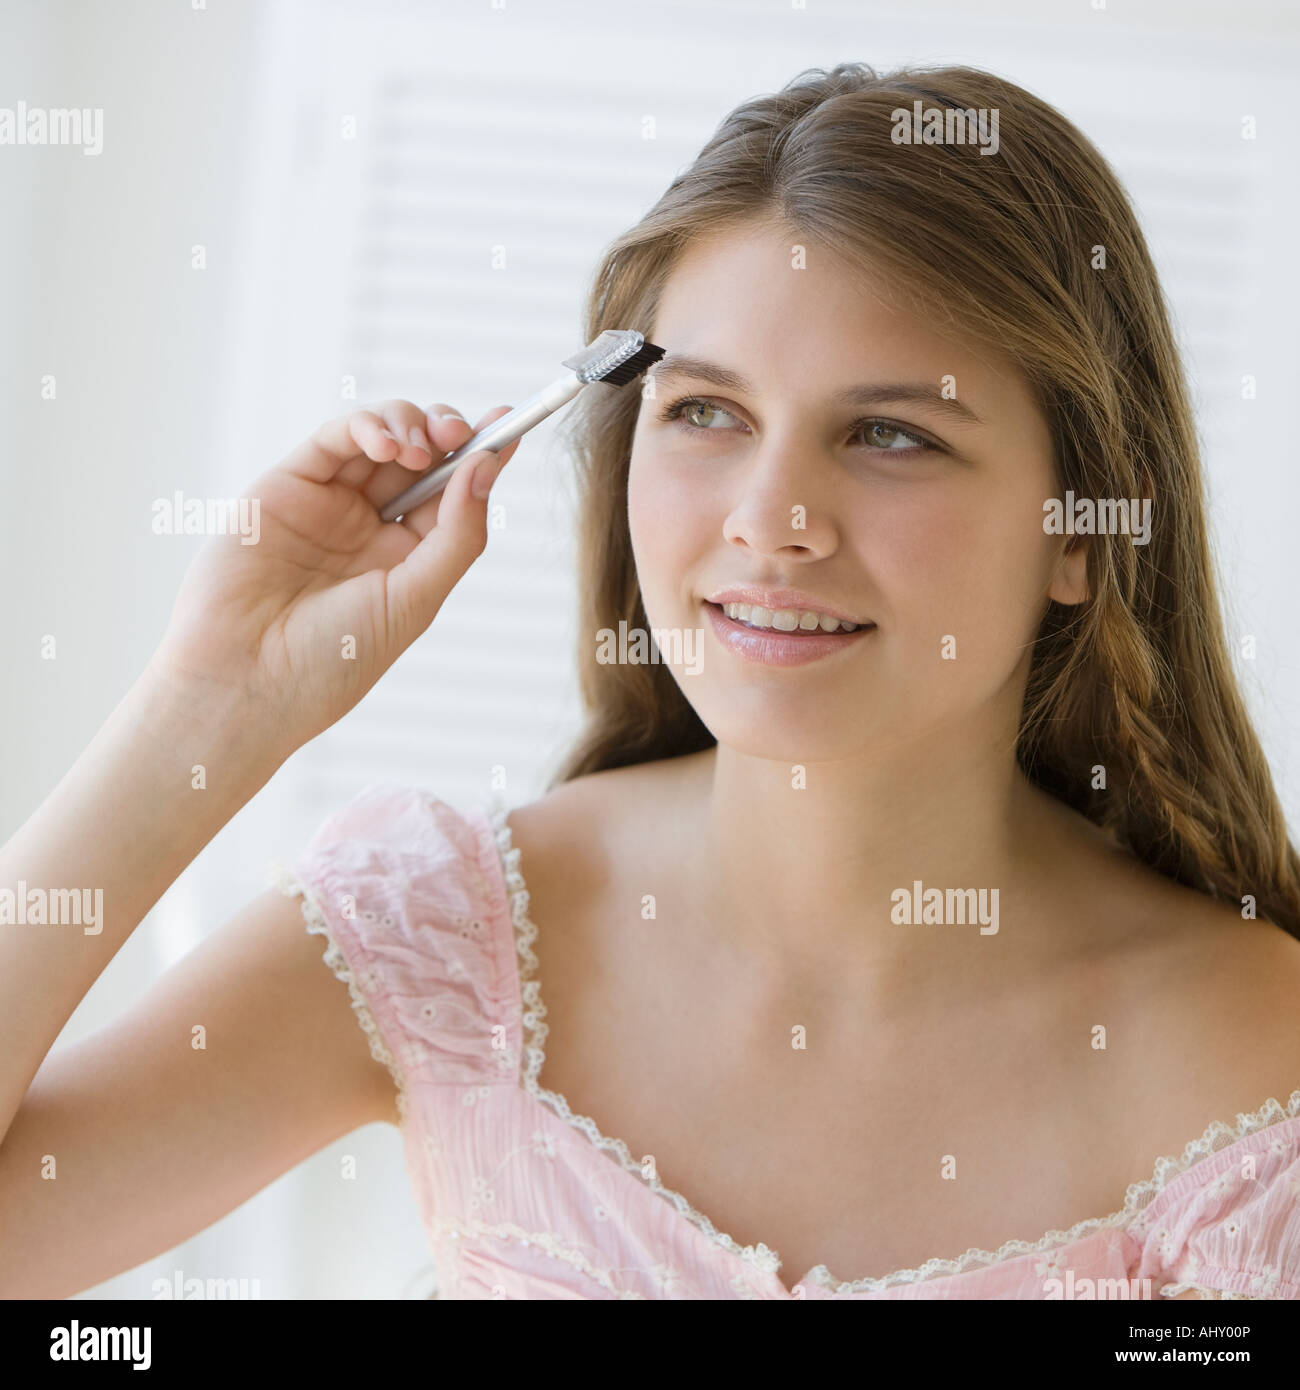 Portrait of girl wearing off shoulder blouse Stock Photo